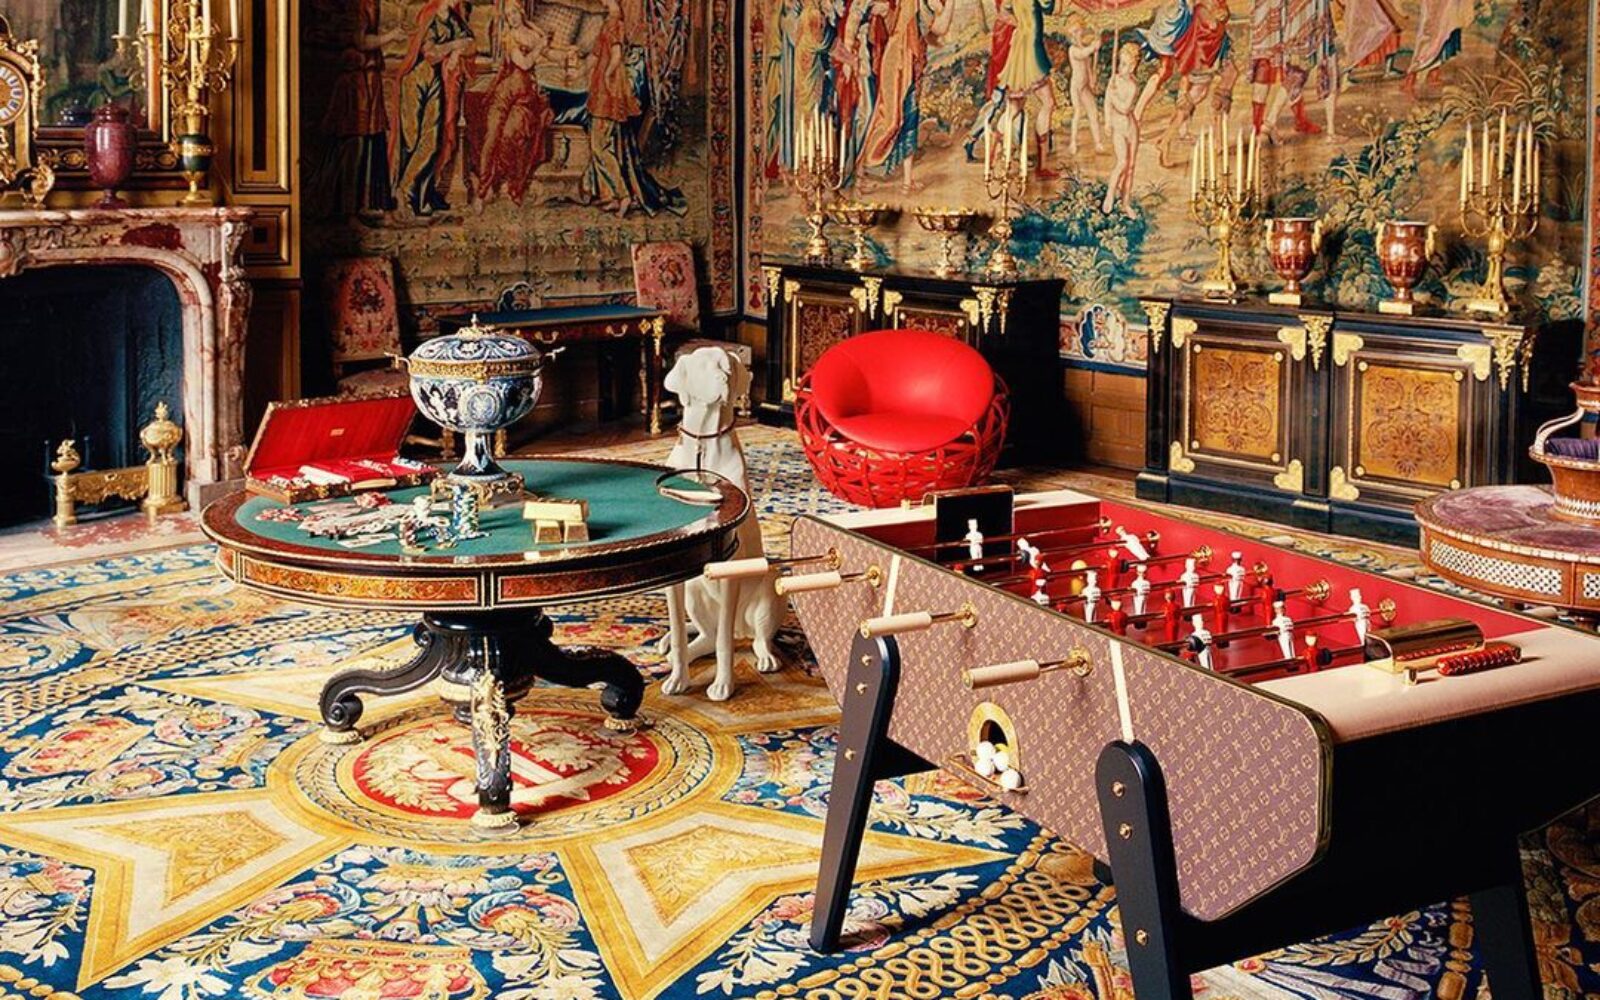 Louis Vuitton products in the ballroom of a French chateau